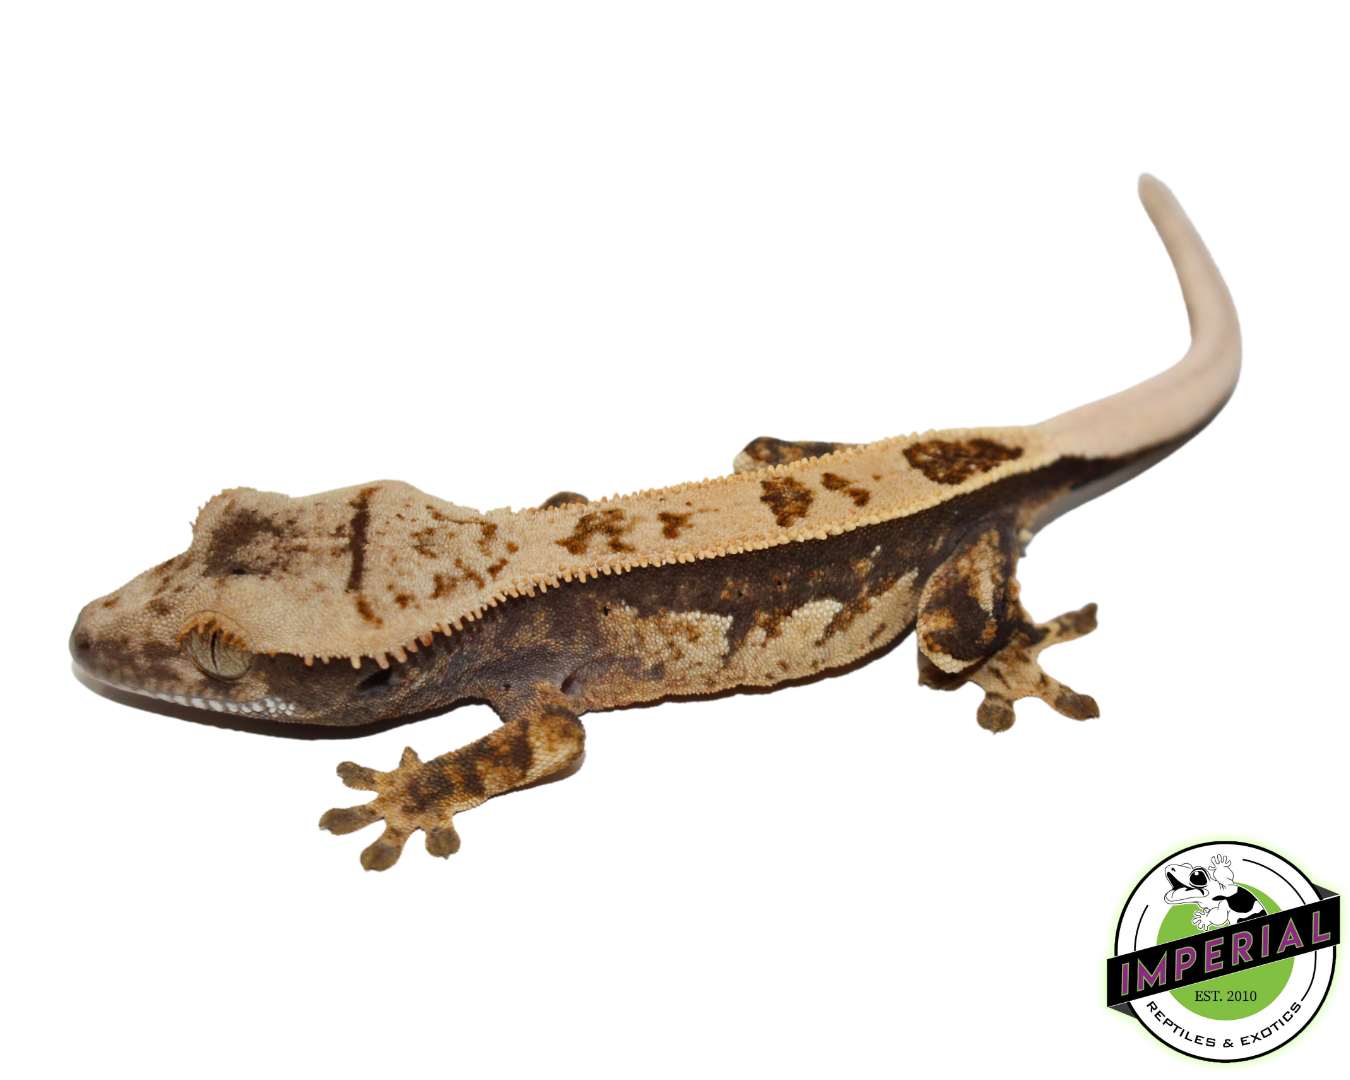 quadstripe crested geckos for sale online at cheap prices